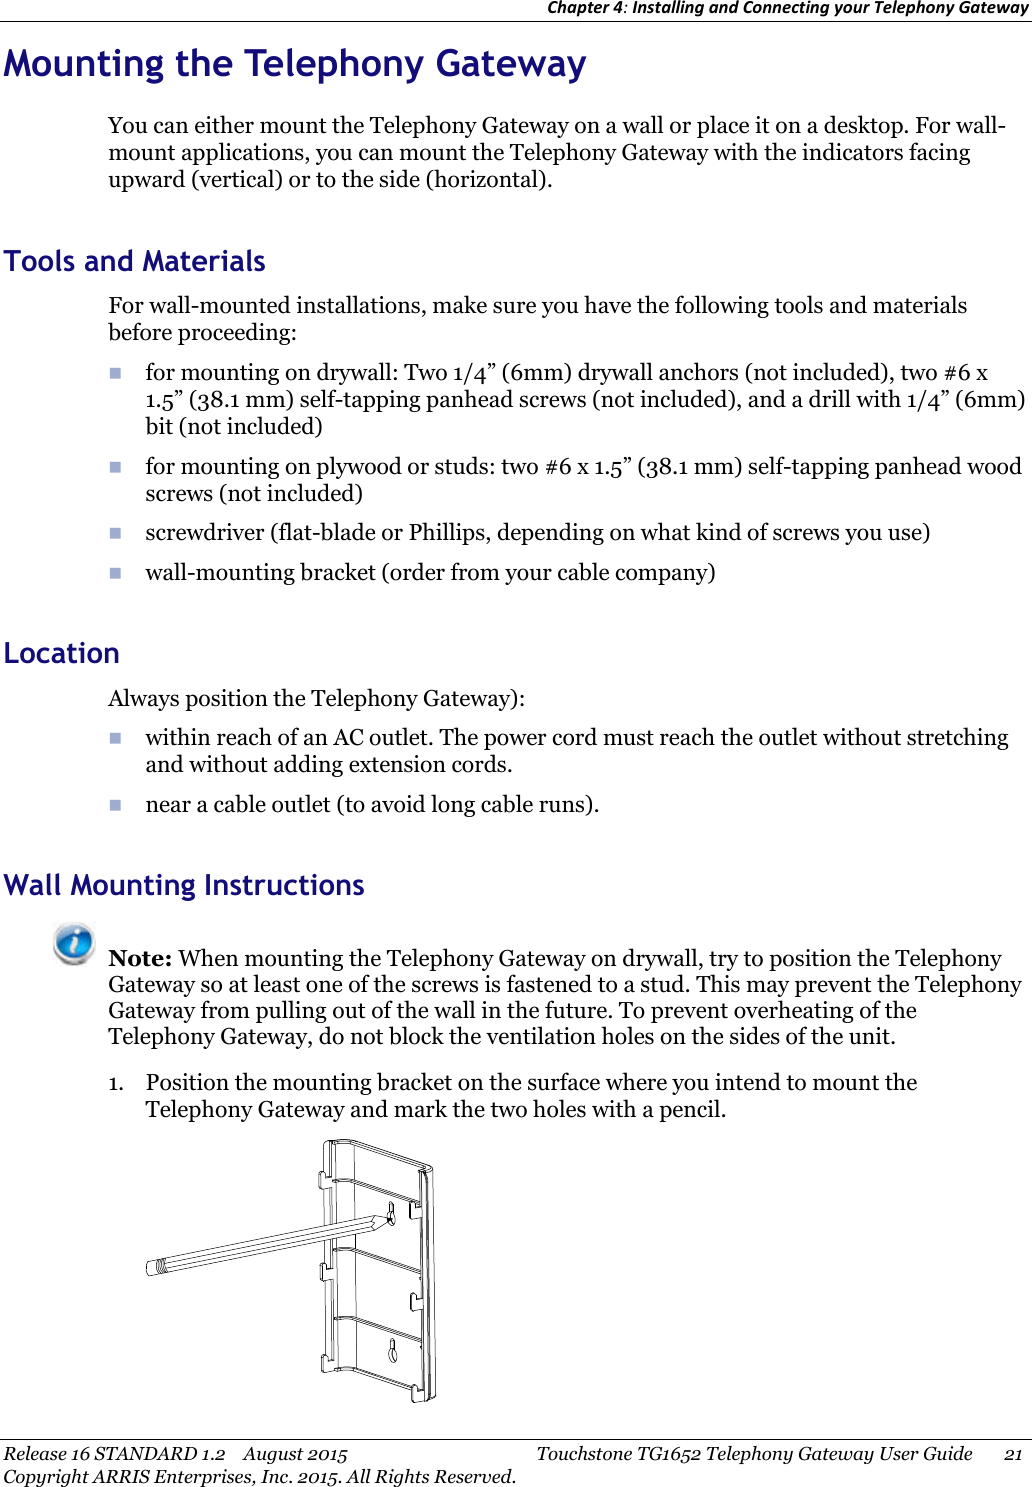 Chapter 4:Installing and Connecting your Telephony GatewayRelease 16 STANDARD 1.2 August 2015 Touchstone TG1652 Telephony Gateway User Guide 21Copyright ARRIS Enterprises, Inc. 2015. All Rights Reserved.Mounting the Telephony GatewayYou can either mount the Telephony Gateway on a wall or place it on a desktop. For wall-mount applications, you can mount the Telephony Gateway with the indicators facingupward (vertical) or to the side (horizontal).Tools and MaterialsFor wall-mounted installations, make sure you have the following tools and materialsbefore proceeding:for mounting on drywall: Two 1/4” (6mm) drywall anchors (not included), two #6 x1.5” (38.1 mm) self-tapping panhead screws (not included), and a drill with 1/4” (6mm)bit (not included)for mounting on plywood or studs: two #6 x 1.5” (38.1 mm) self-tapping panhead woodscrews (not included)screwdriver (flat-blade or Phillips, depending on what kind of screws you use)wall-mounting bracket (order from your cable company)LocationAlways position the Telephony Gateway):within reach of an AC outlet. The power cord must reach the outlet without stretchingand without adding extension cords.near a cable outlet (to avoid long cable runs).Wall Mounting InstructionsNote: When mounting the Telephony Gateway on drywall, try to position the TelephonyGateway so at least one of the screws is fastened to a stud. This may prevent the TelephonyGateway from pulling out of the wall in the future. To prevent overheating of theTelephony Gateway, do not block the ventilation holes on the sides of the unit.1. Position the mounting bracket on the surface where you intend to mount theTelephony Gateway and mark the two holes with a pencil.